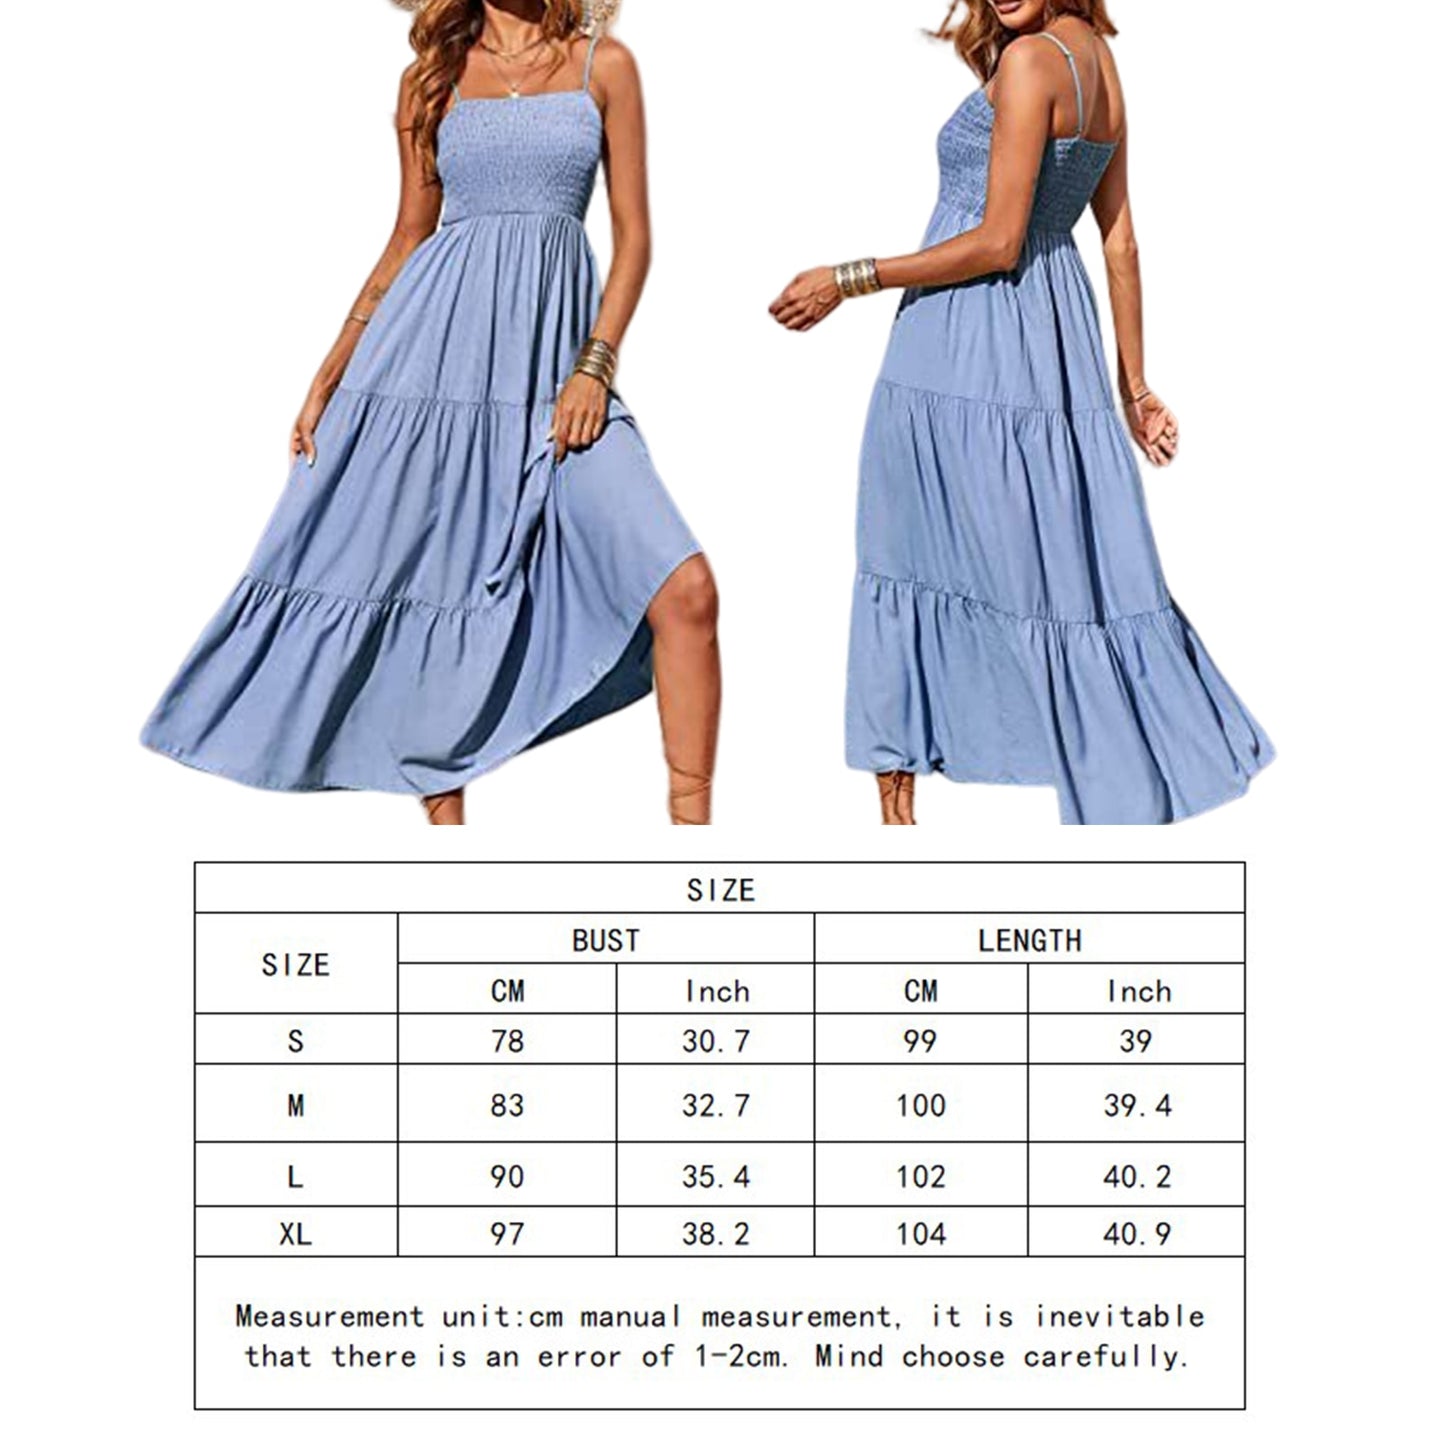 Sexy Long Dress / Slim Fit / Solid Color Dress for Casual or Elegant Summer wear. Tunic Dress in Bohemian Style with A Line Square Neck for Holidays and Vacation.